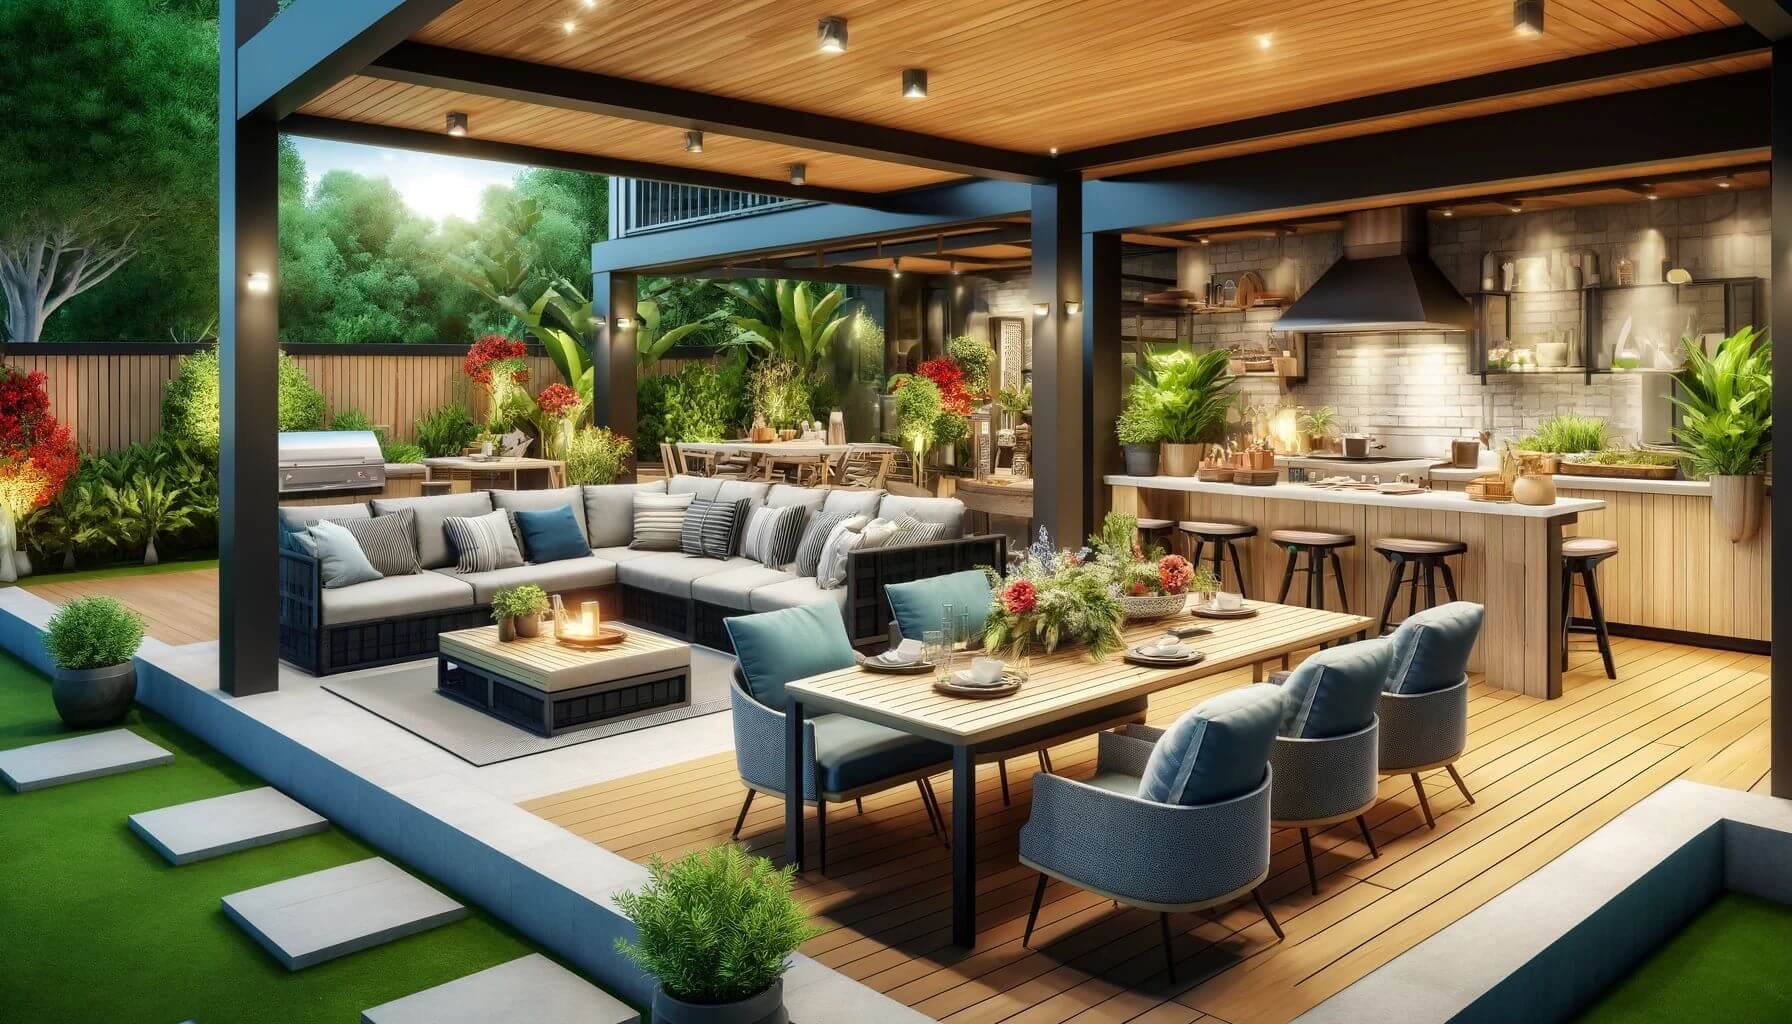 Outdoor Entertaining Area with Kitchen and Seating